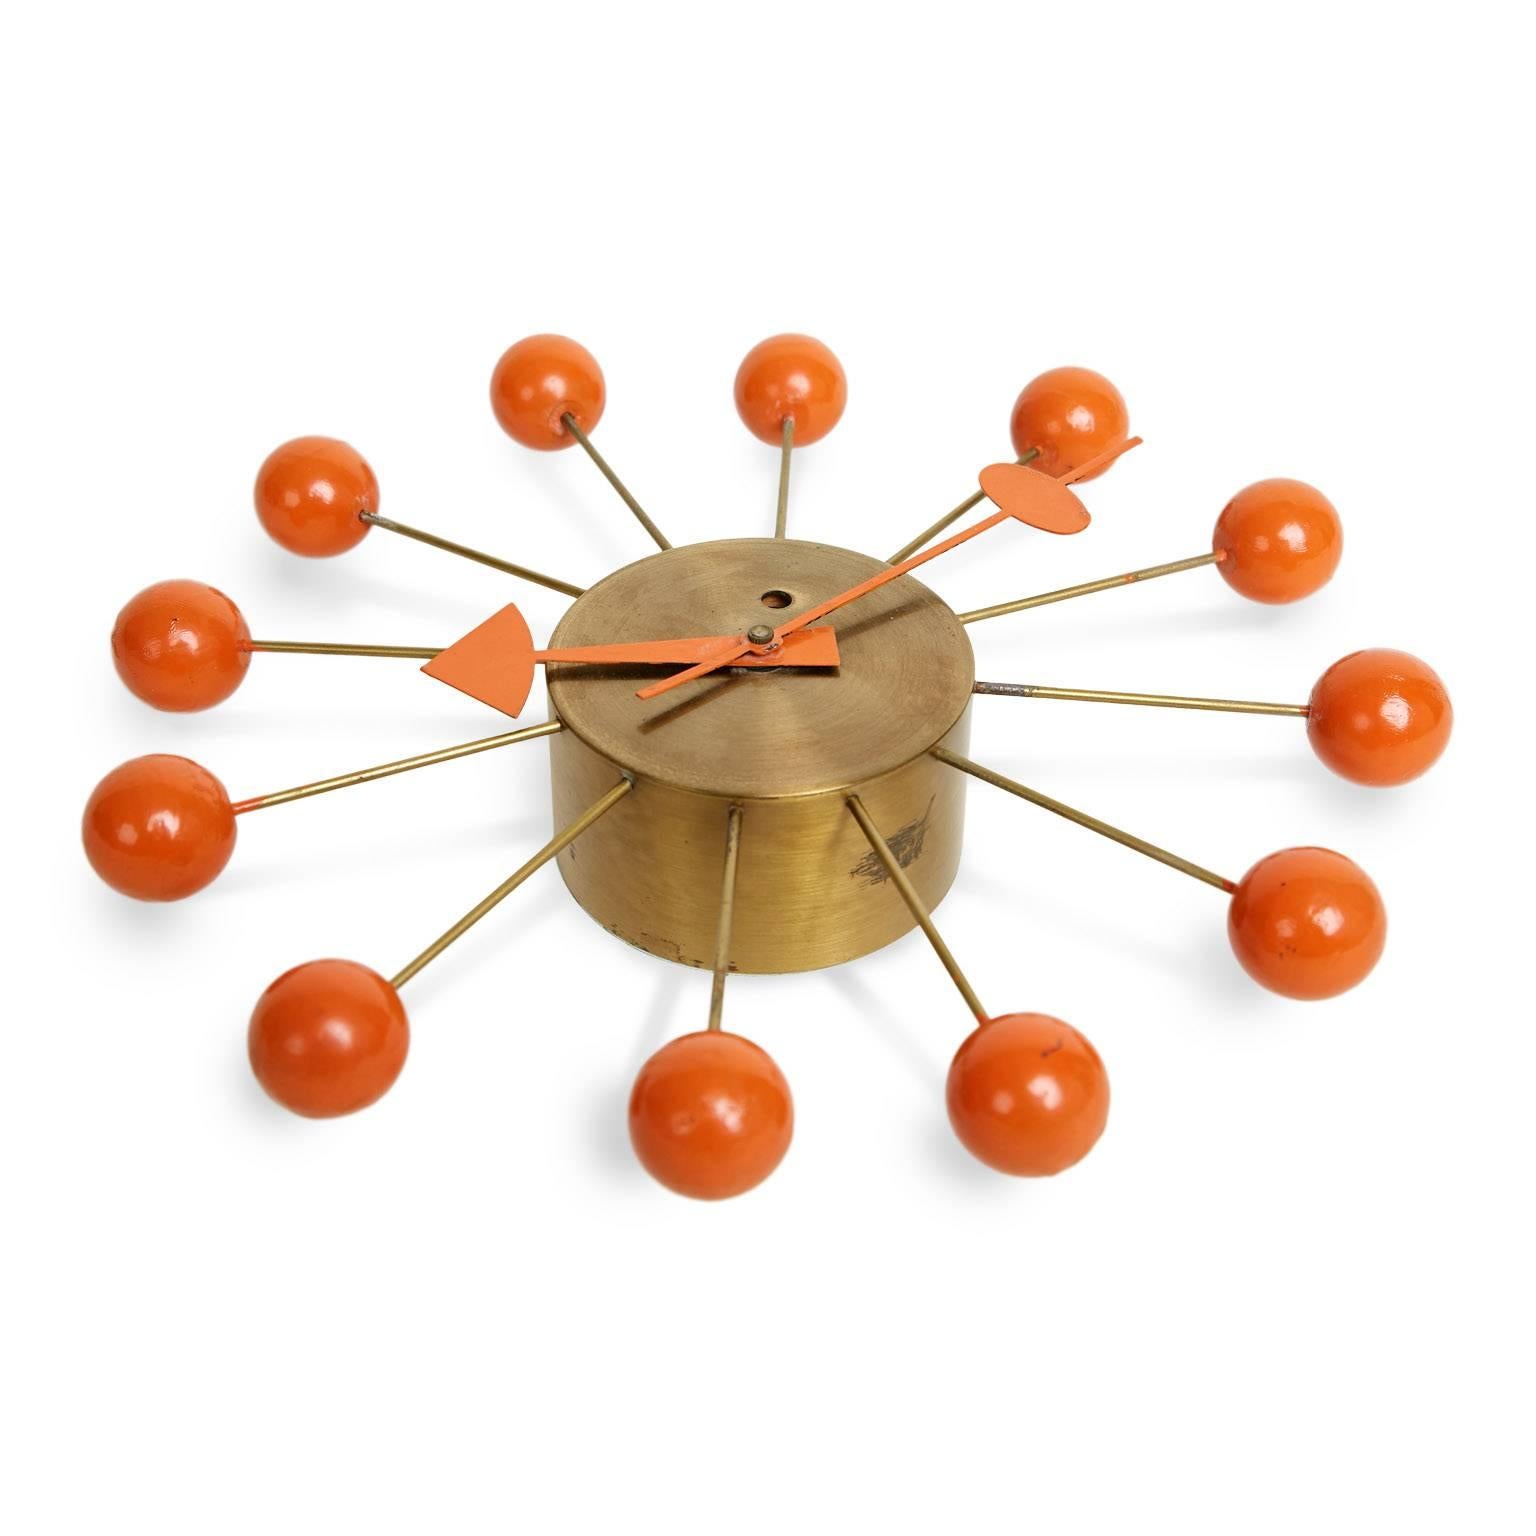 Classic vintage ball clock designed by George Nelson and Irving Harper for Howard Miller. The Ball Clock, first produced in 1949, is a fun and eye-catching wall adornment which will add a bit of interest to any space. Featuring a brushed brass base